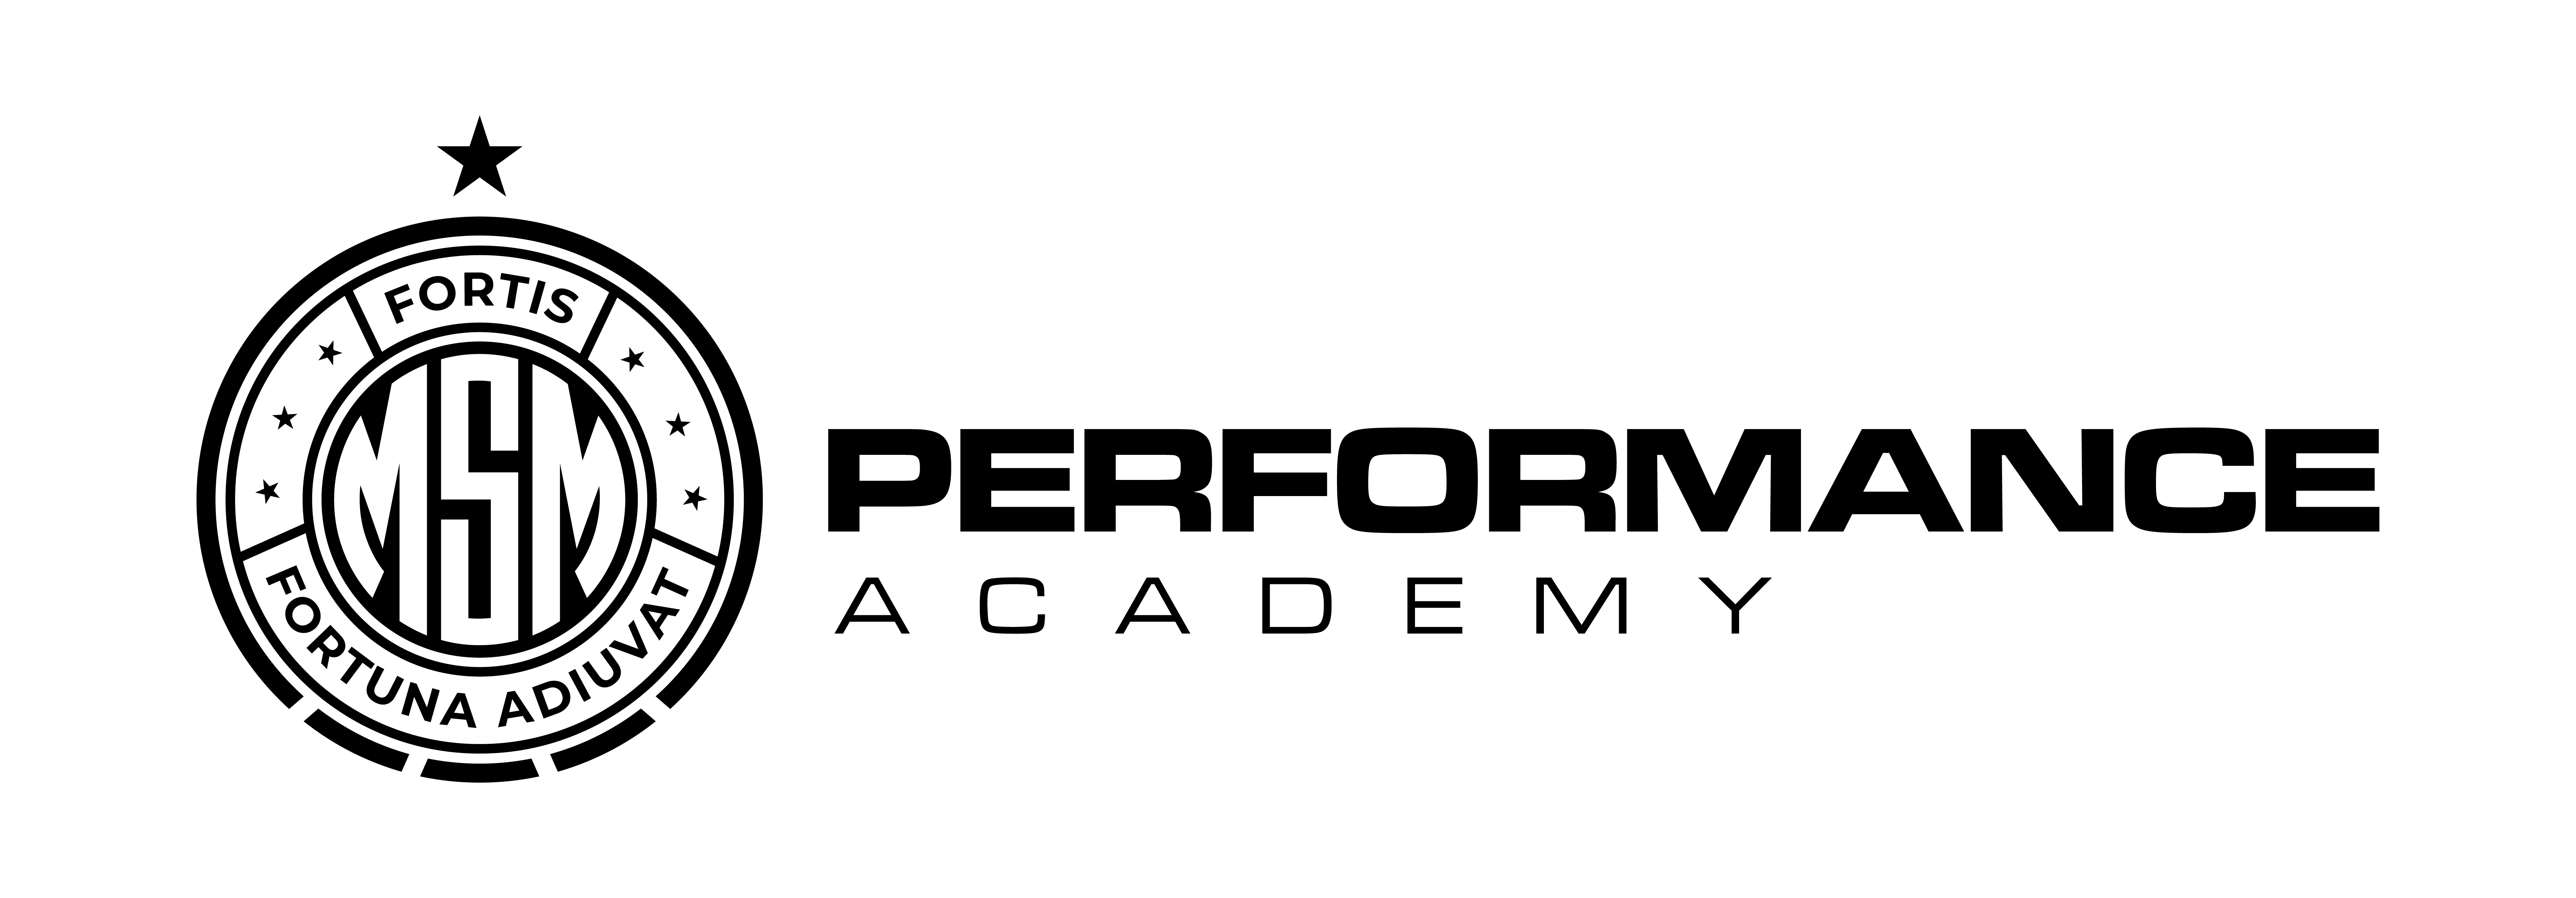 MSM Performance Academy Announces the Introduction of The MSM Foundation and The Jordan Year Challenge